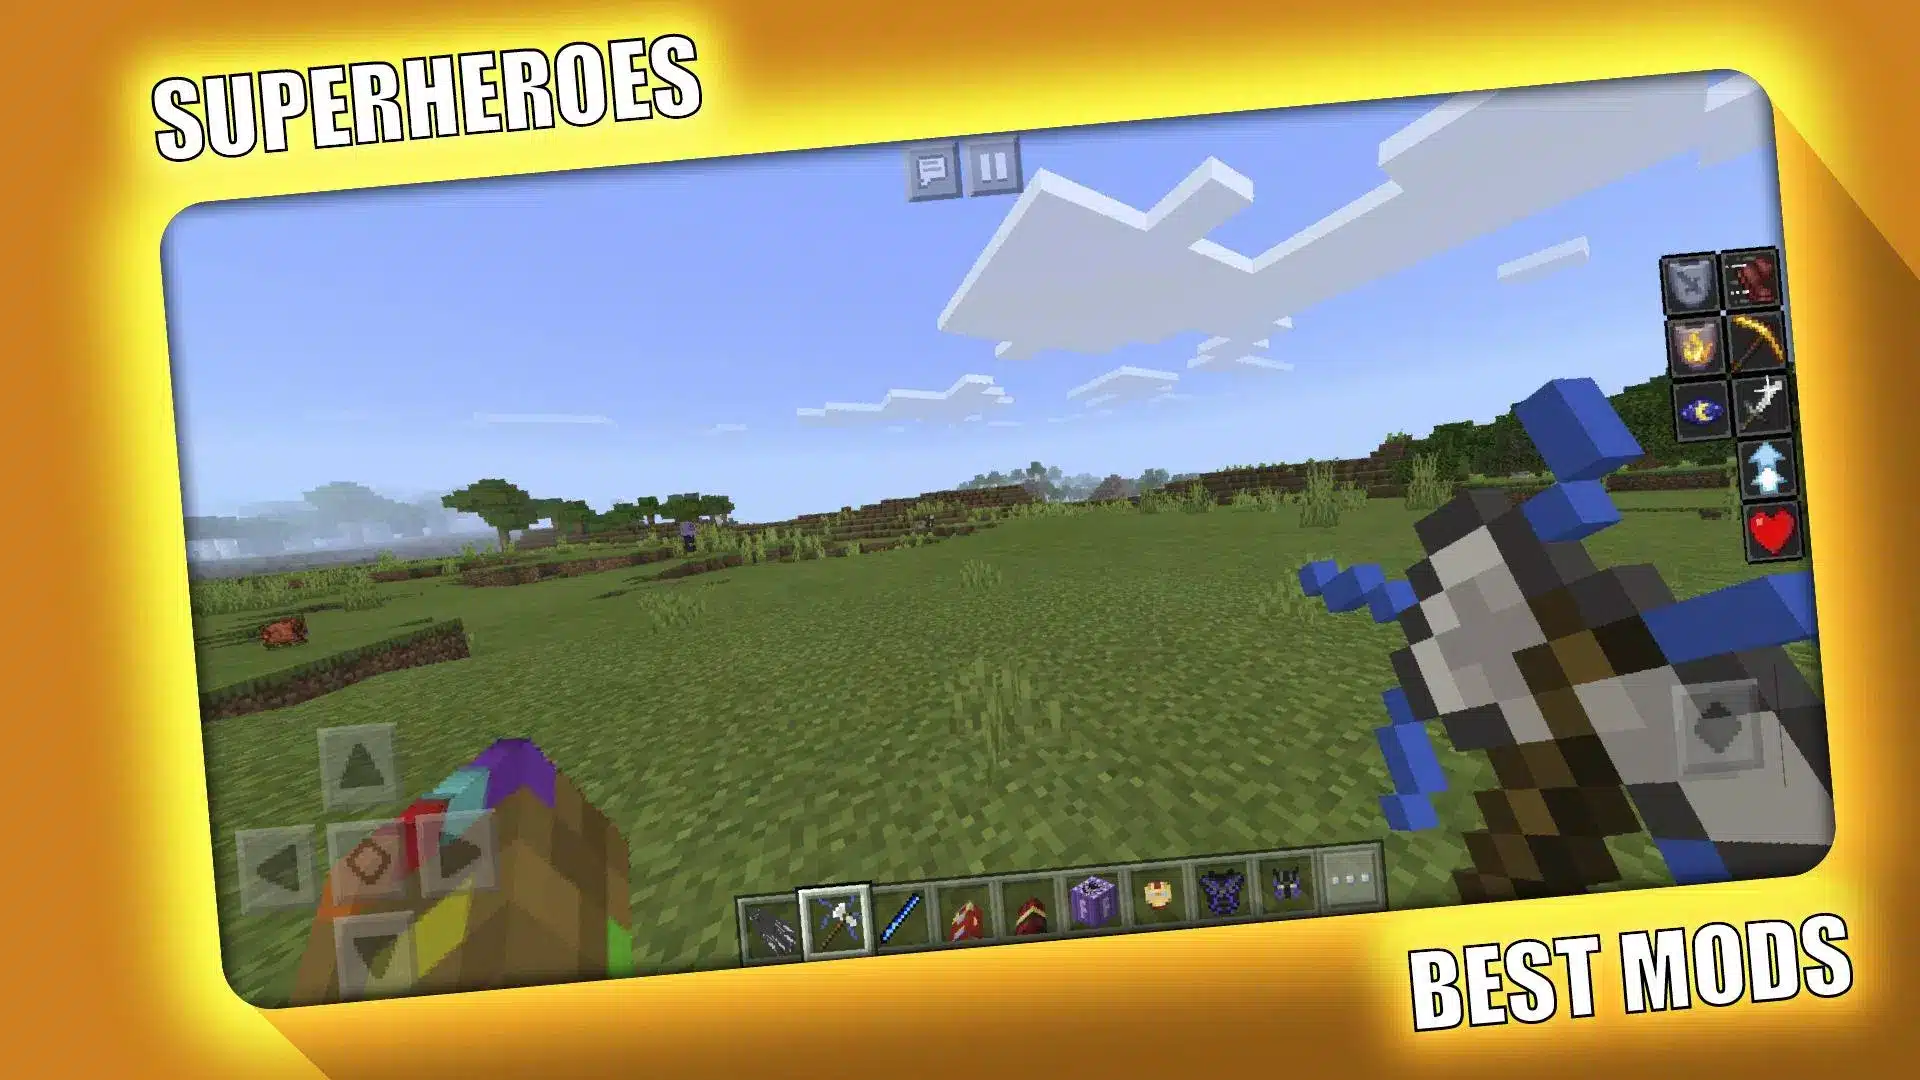 Superheroes Mod for Minecraft Image 2